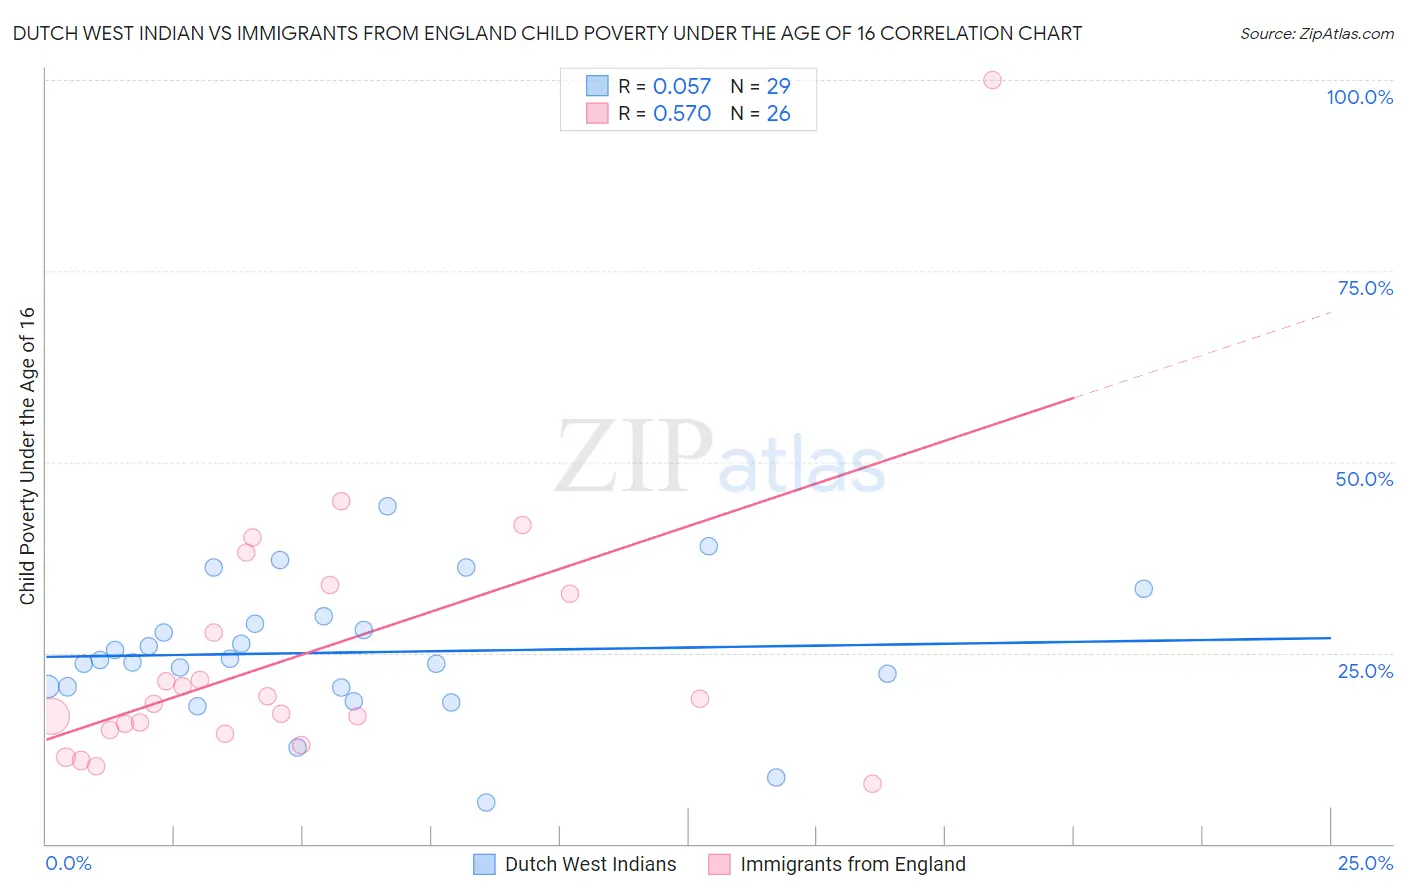 Dutch West Indian vs Immigrants from England Child Poverty Under the Age of 16